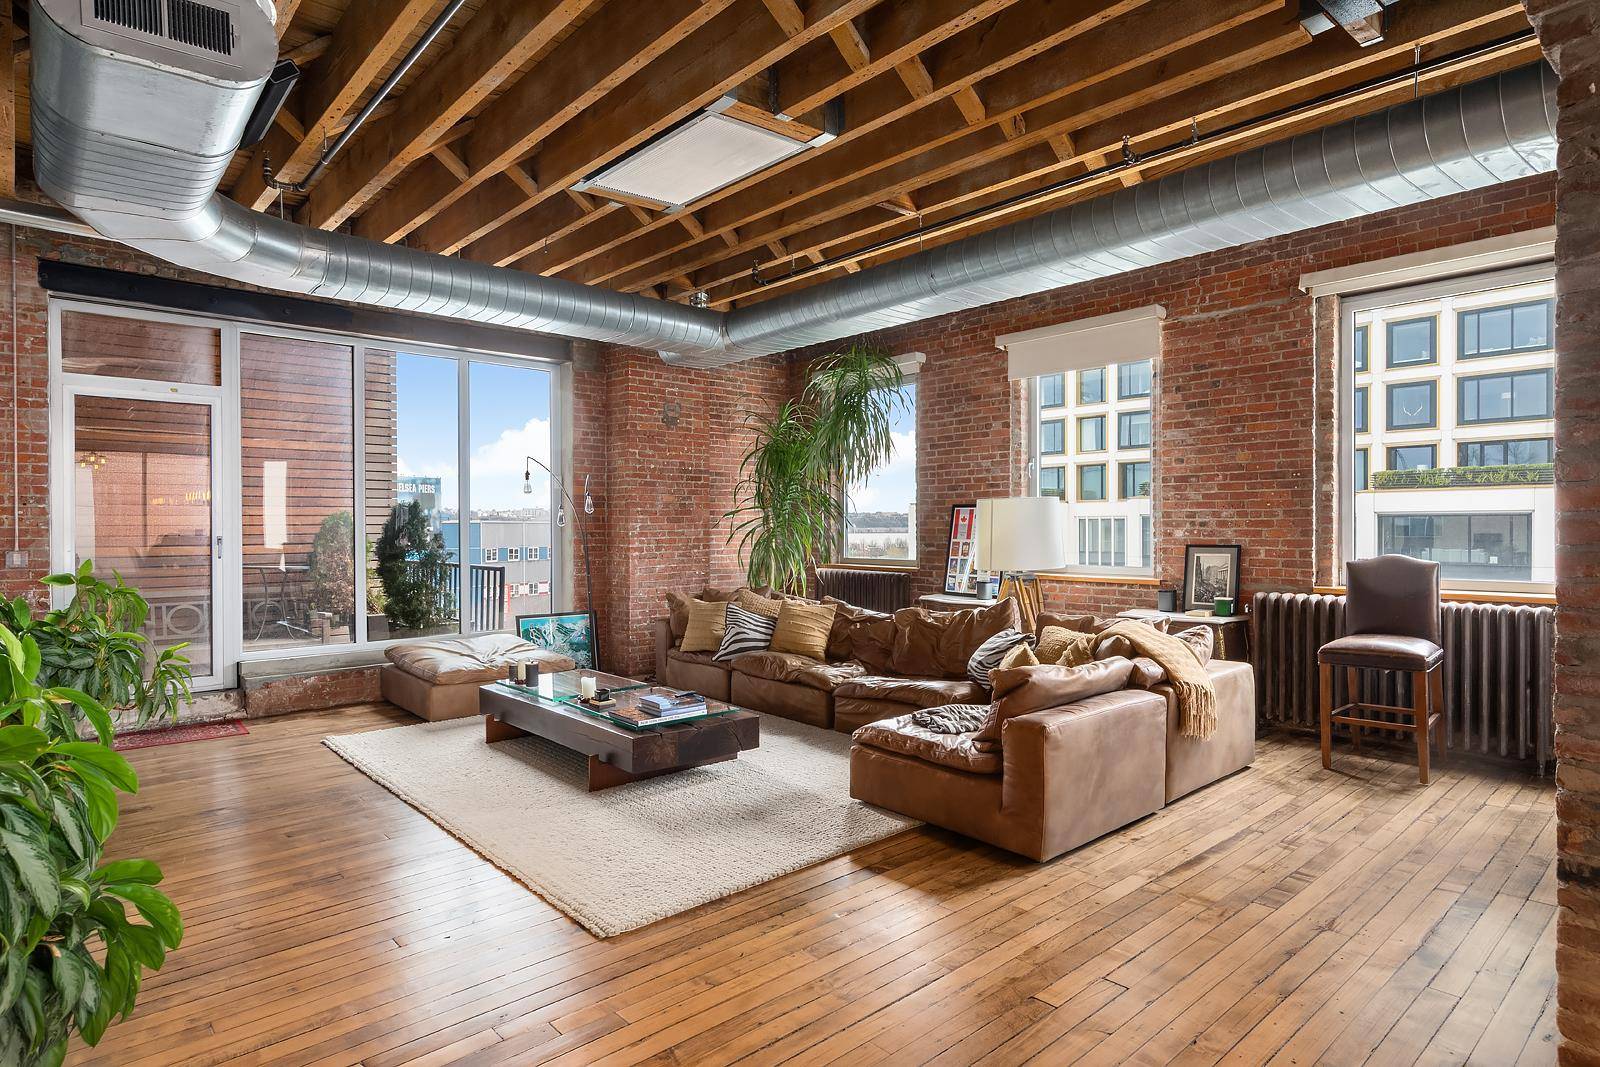 The Residence Step into this expansive loft in the heart of West Chelsea and take in the exceptional 3600 square feet of space, designed to preserve architectural authenticity.